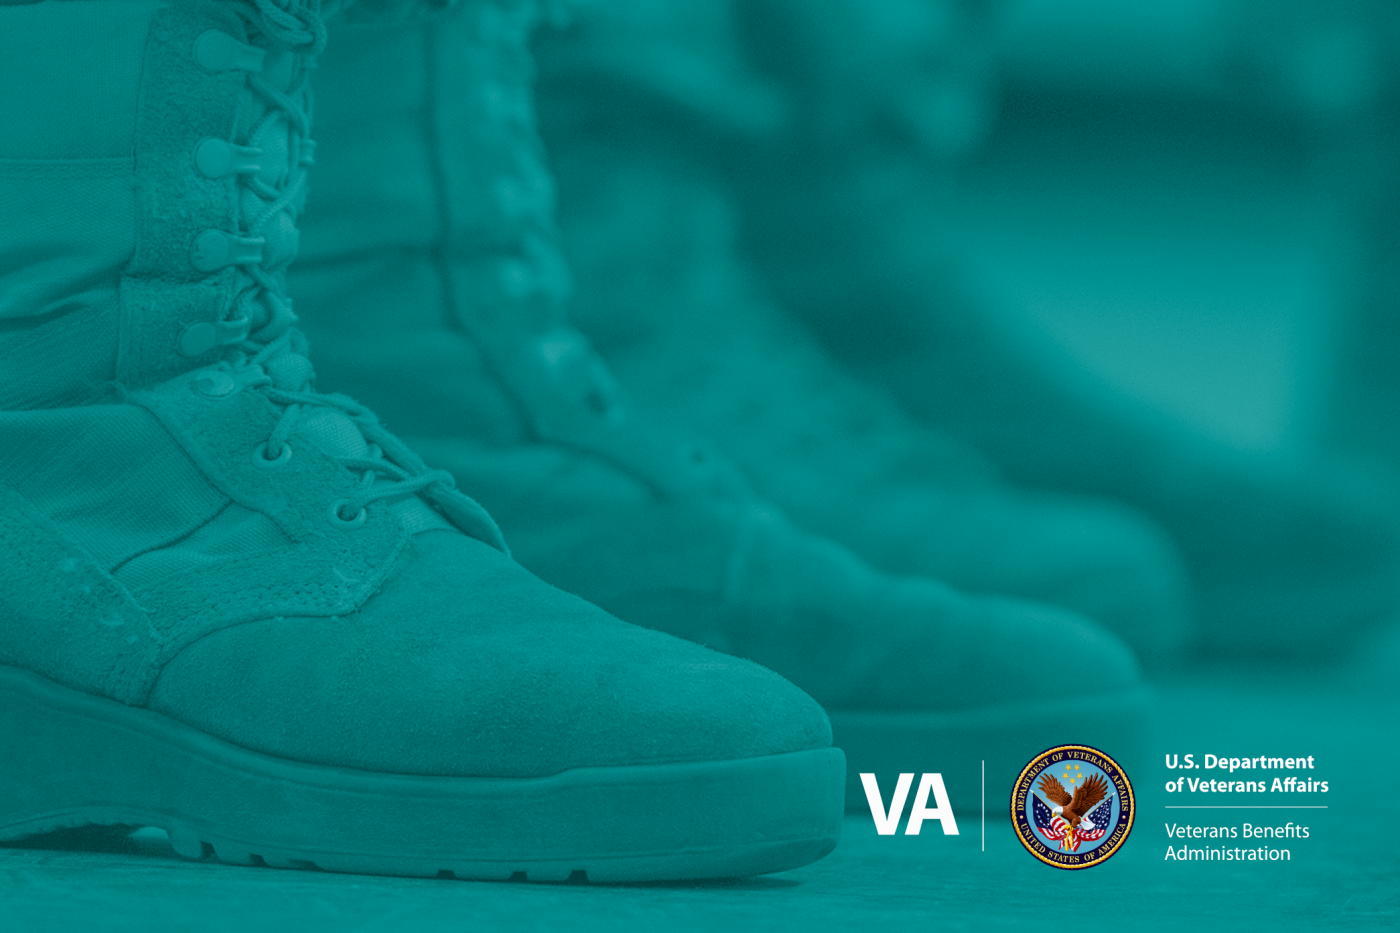 Combat boots overlaid by teal, which represents support for military sexual trauma victims.